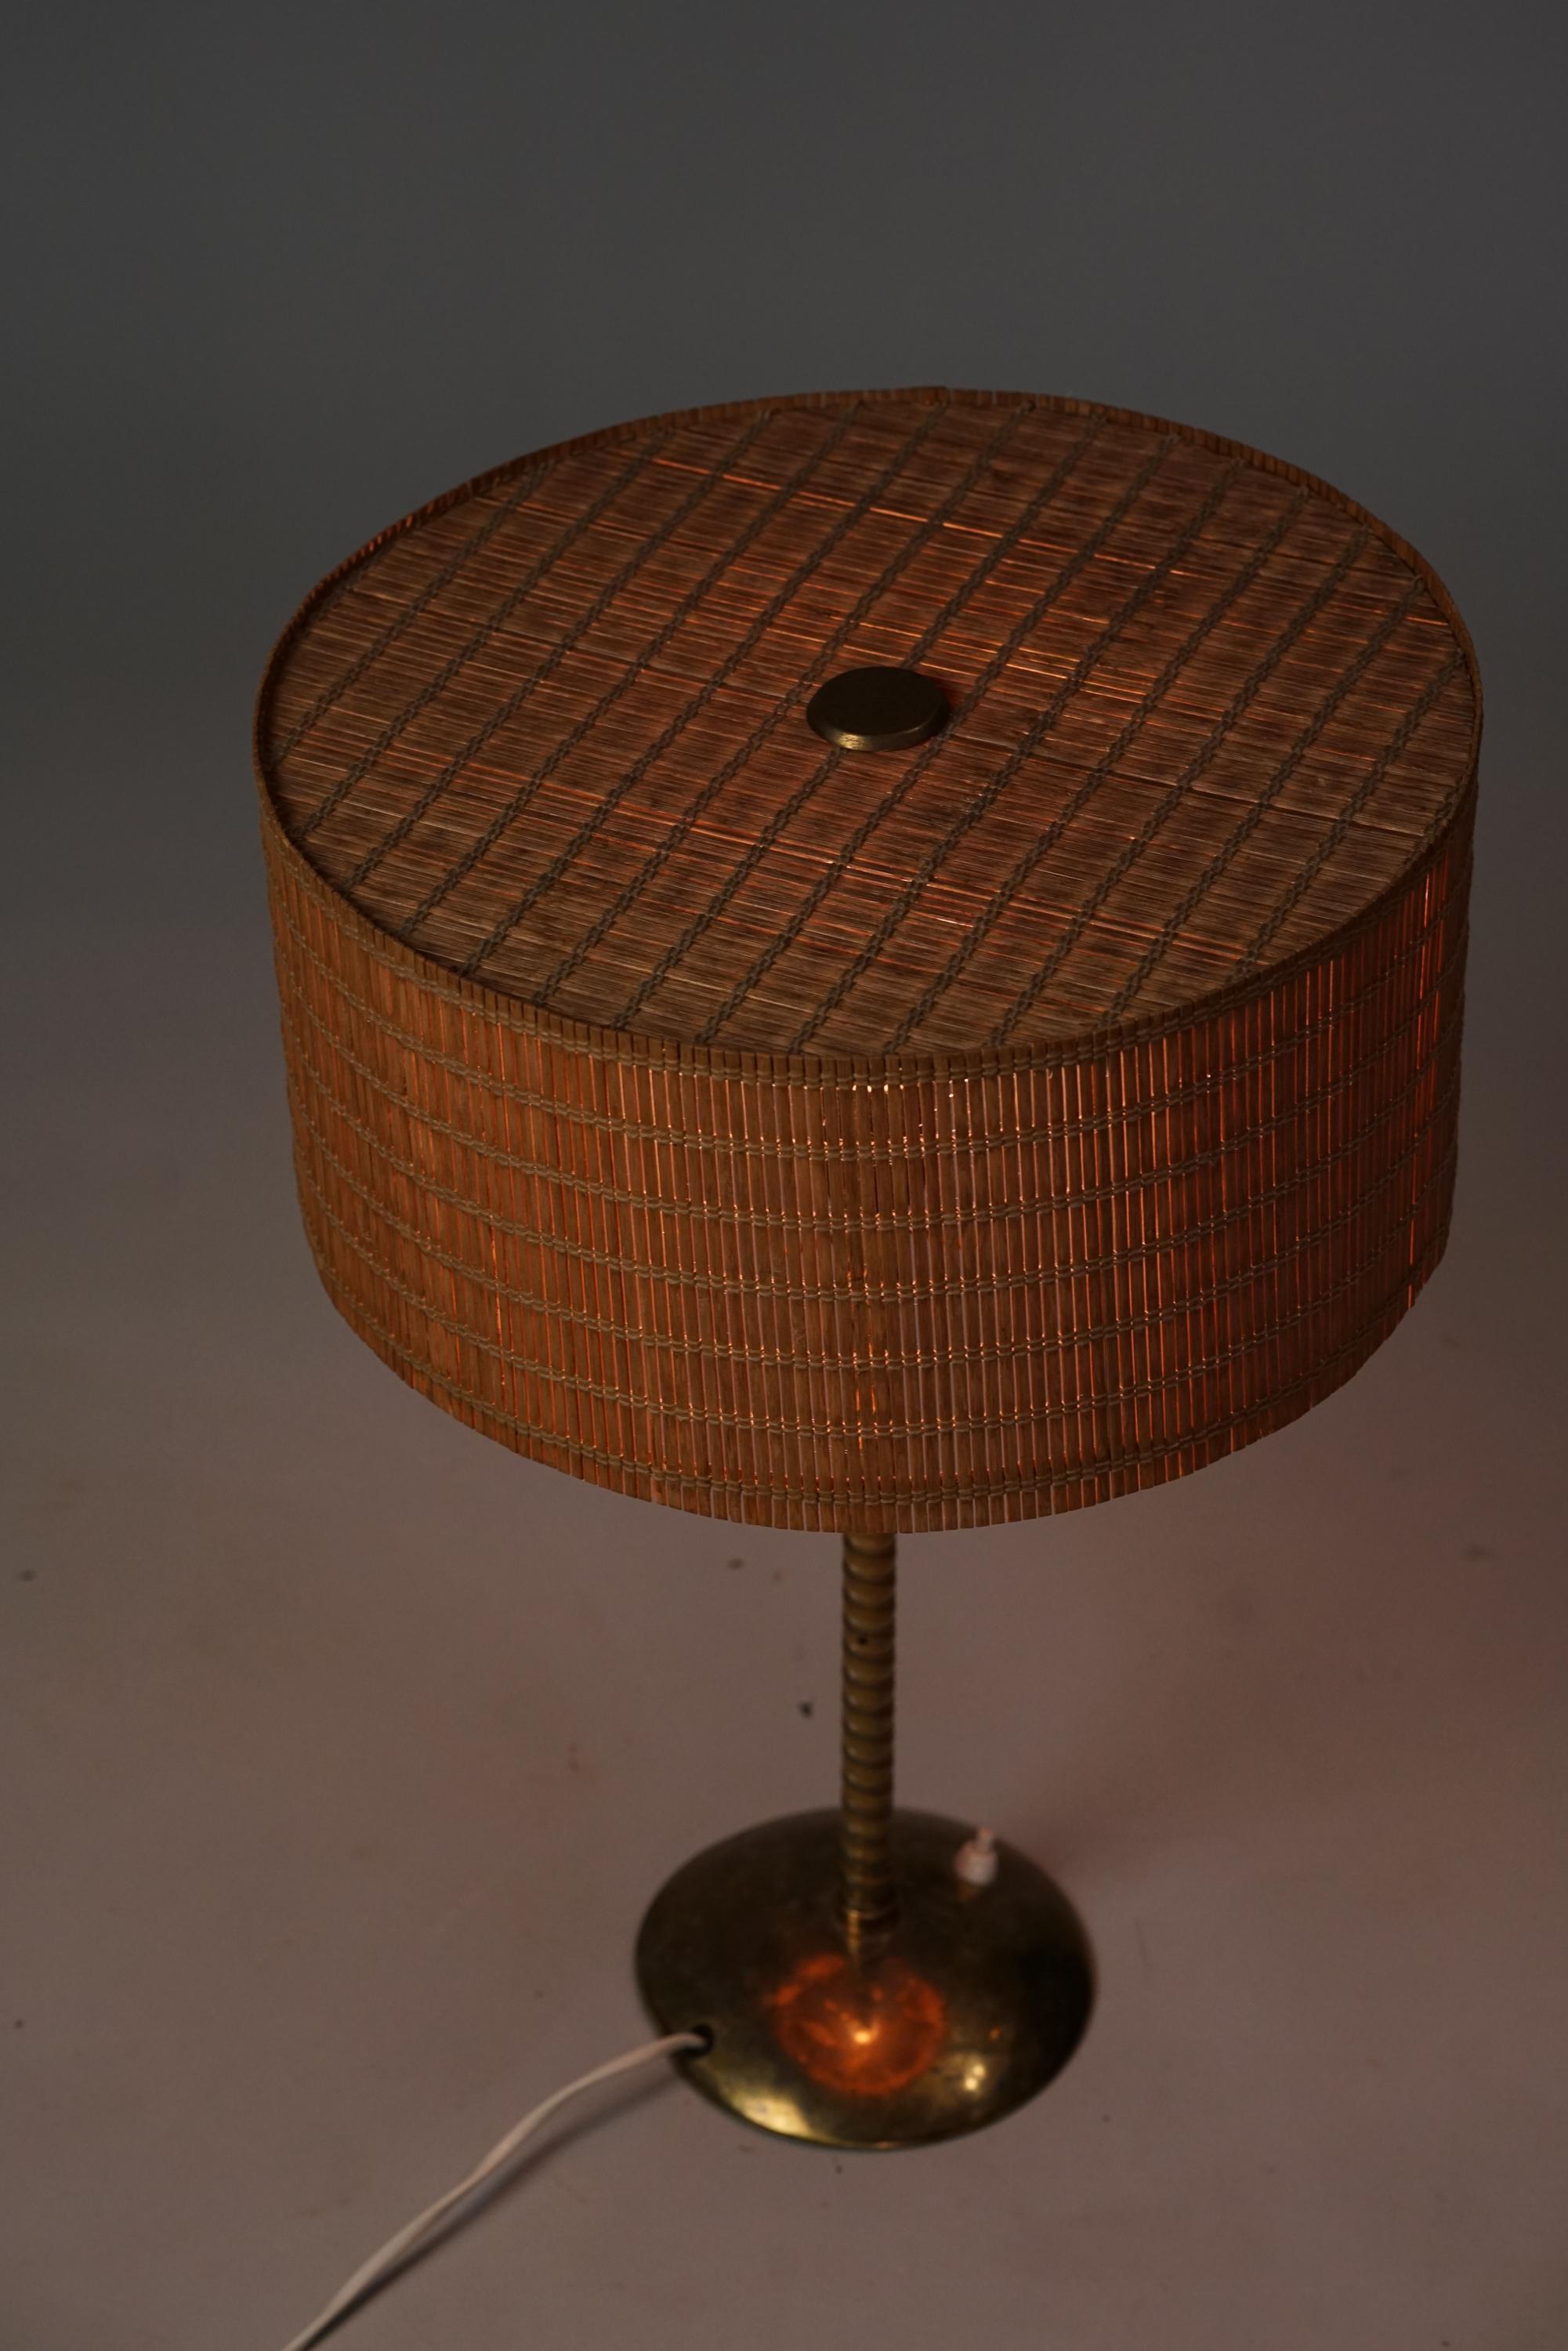 Rare Lisa Johansson-Pape Table Lamp, Orno Oy, 1940/1950s For Sale 8